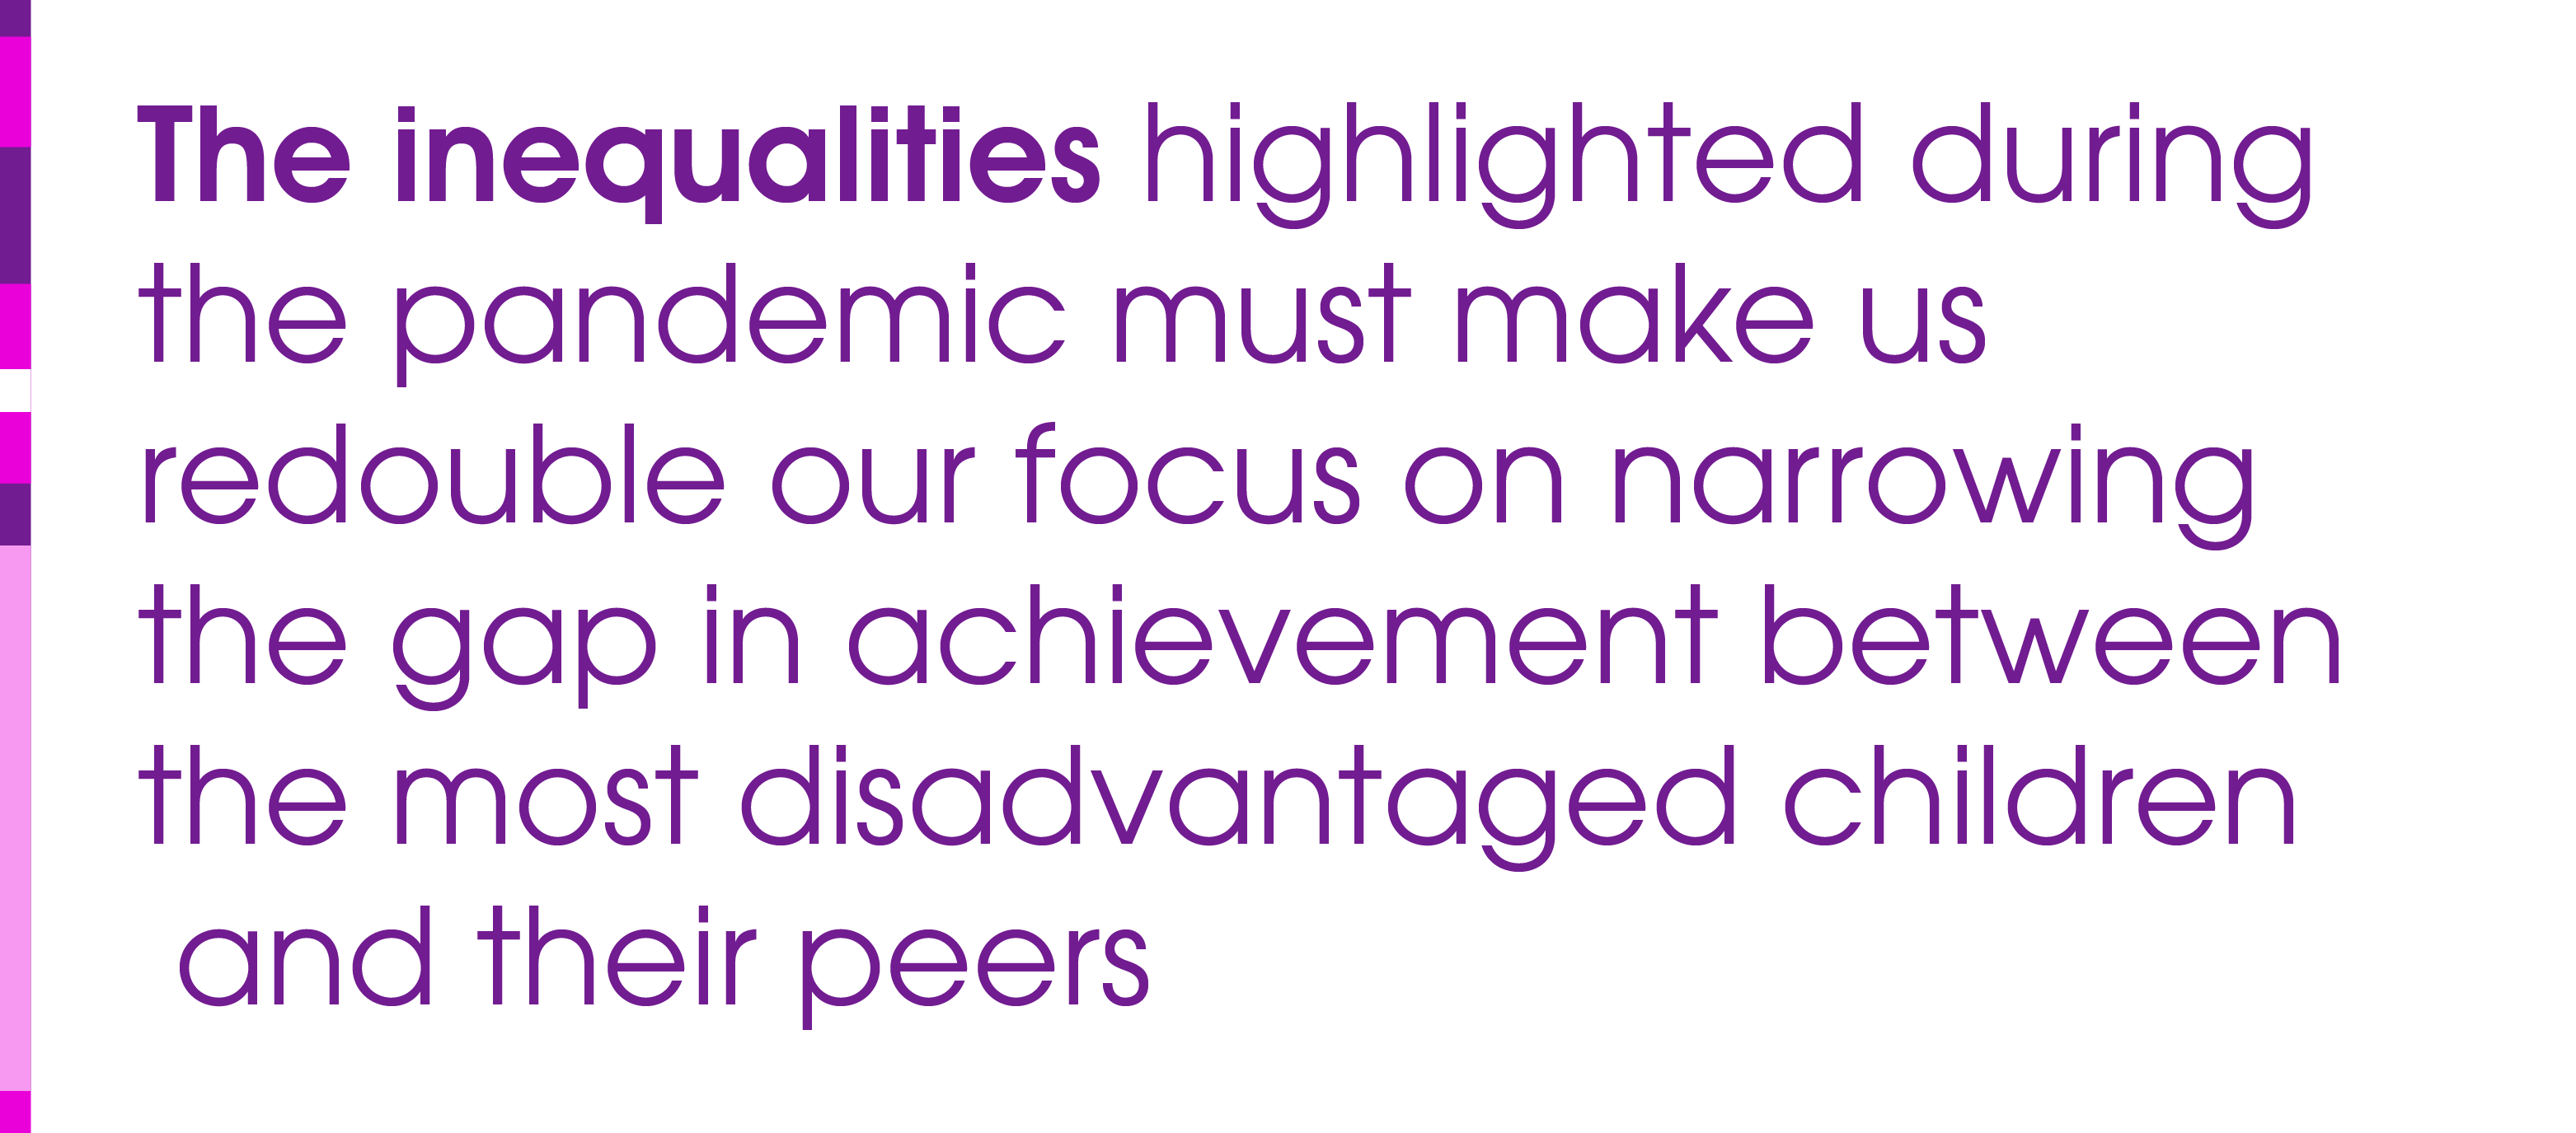 The inequalities highlighted during the pandemic must make us redouble our focus on narrowing the gap in achievement between the most disadvantaged children and their peers